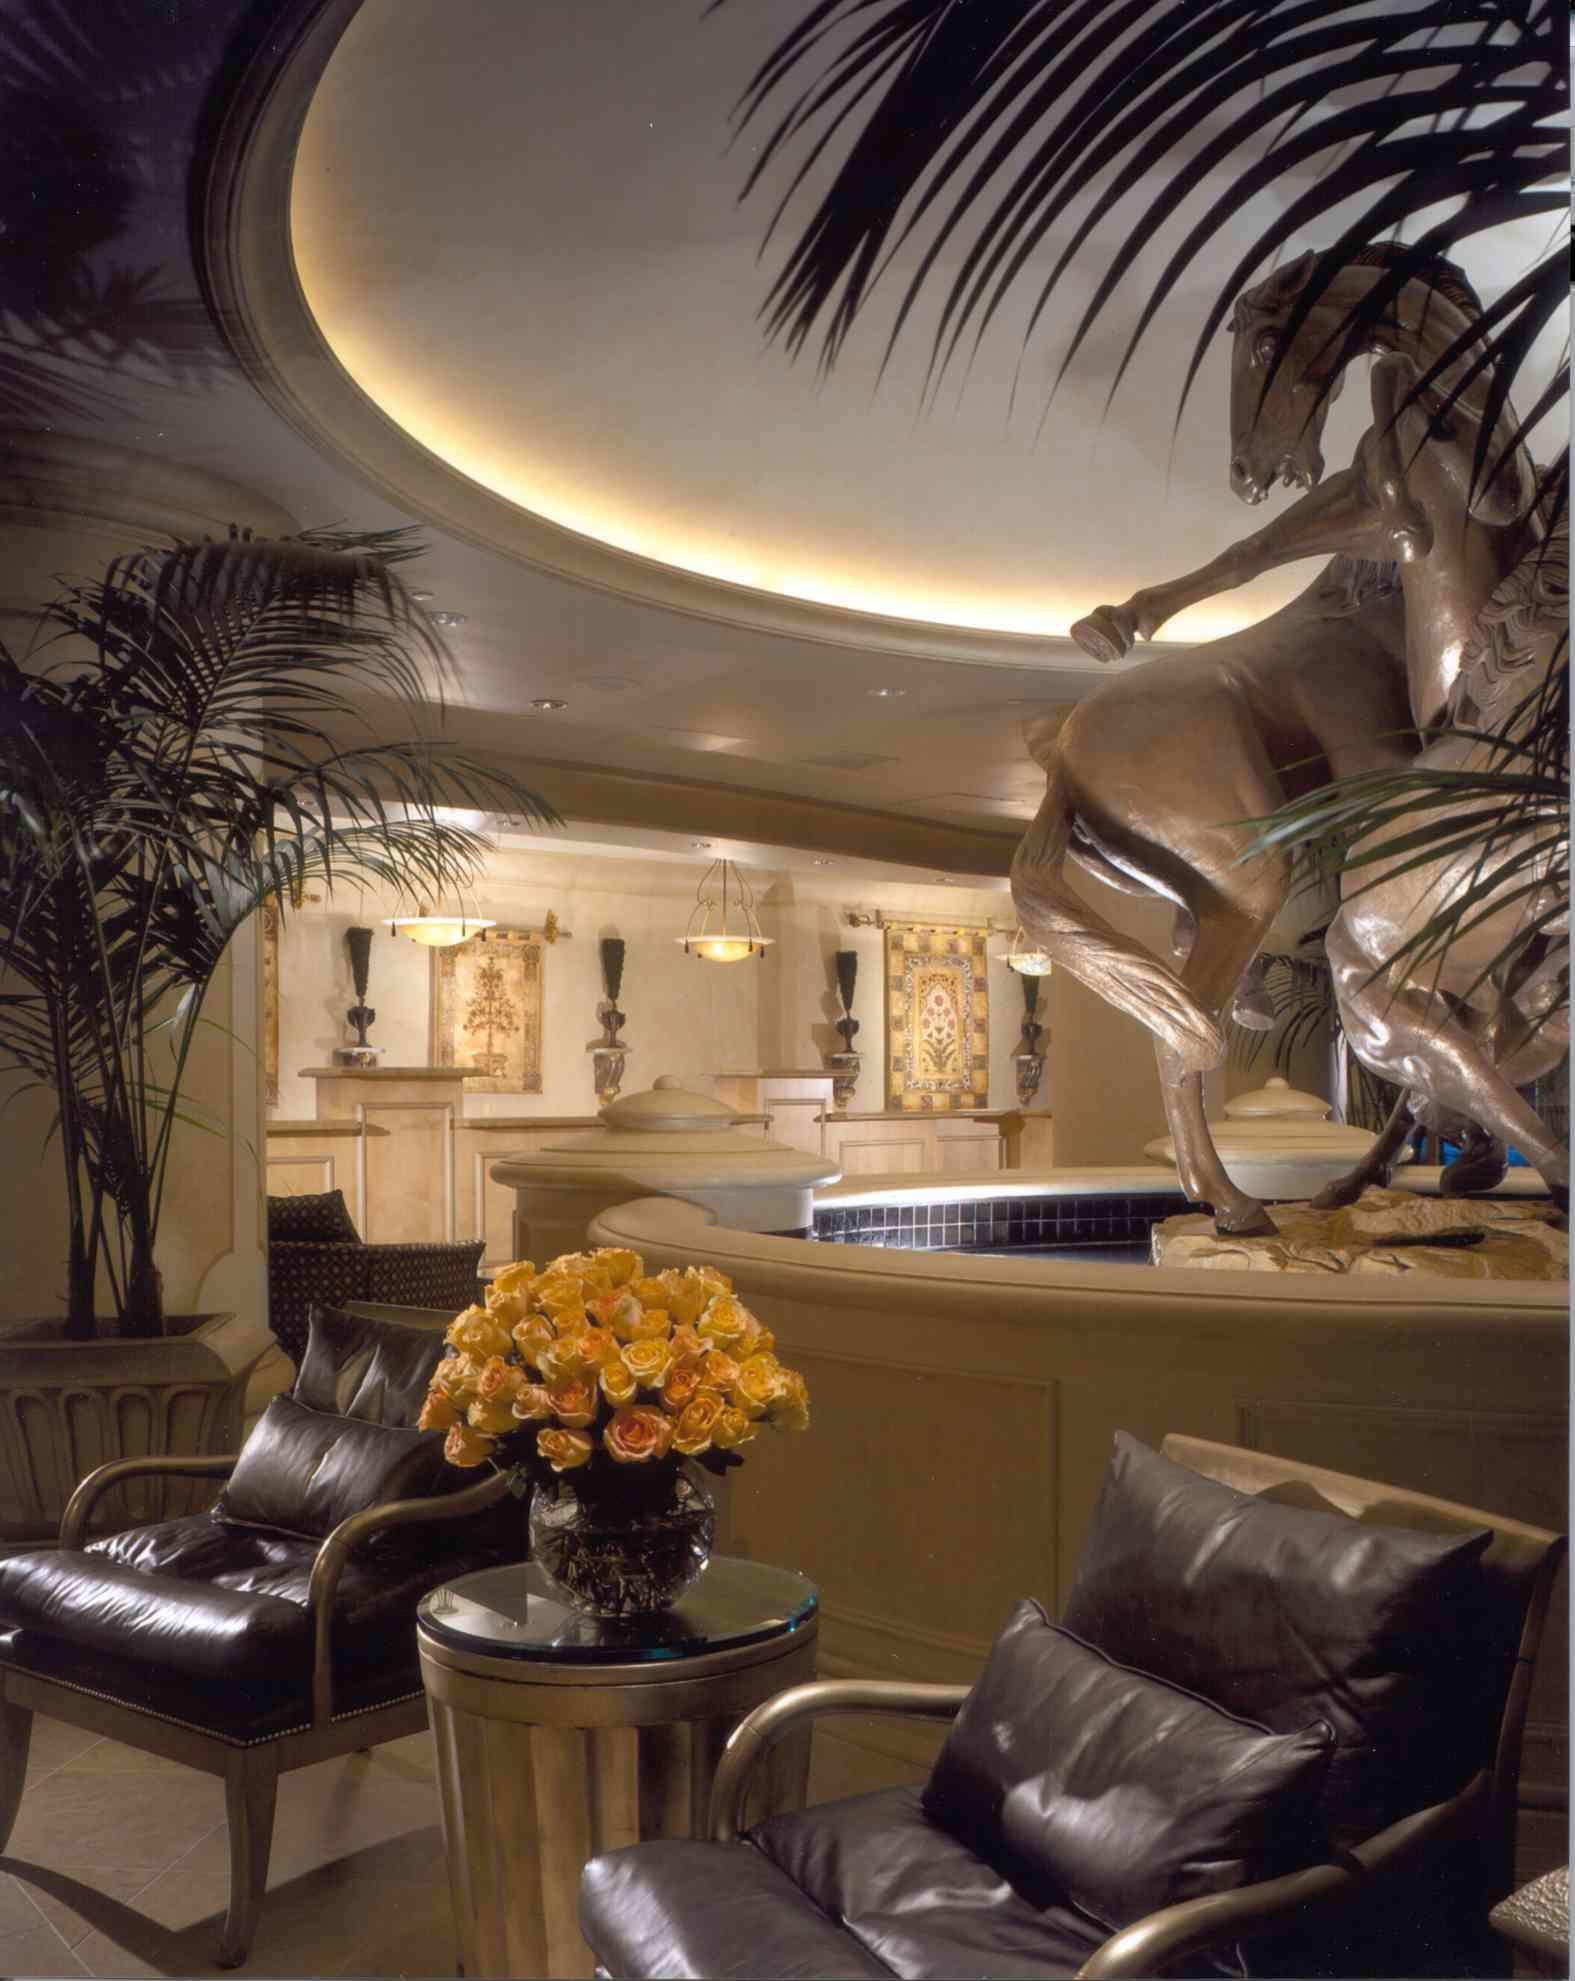 The Villas at Polo Towers - Reception Area